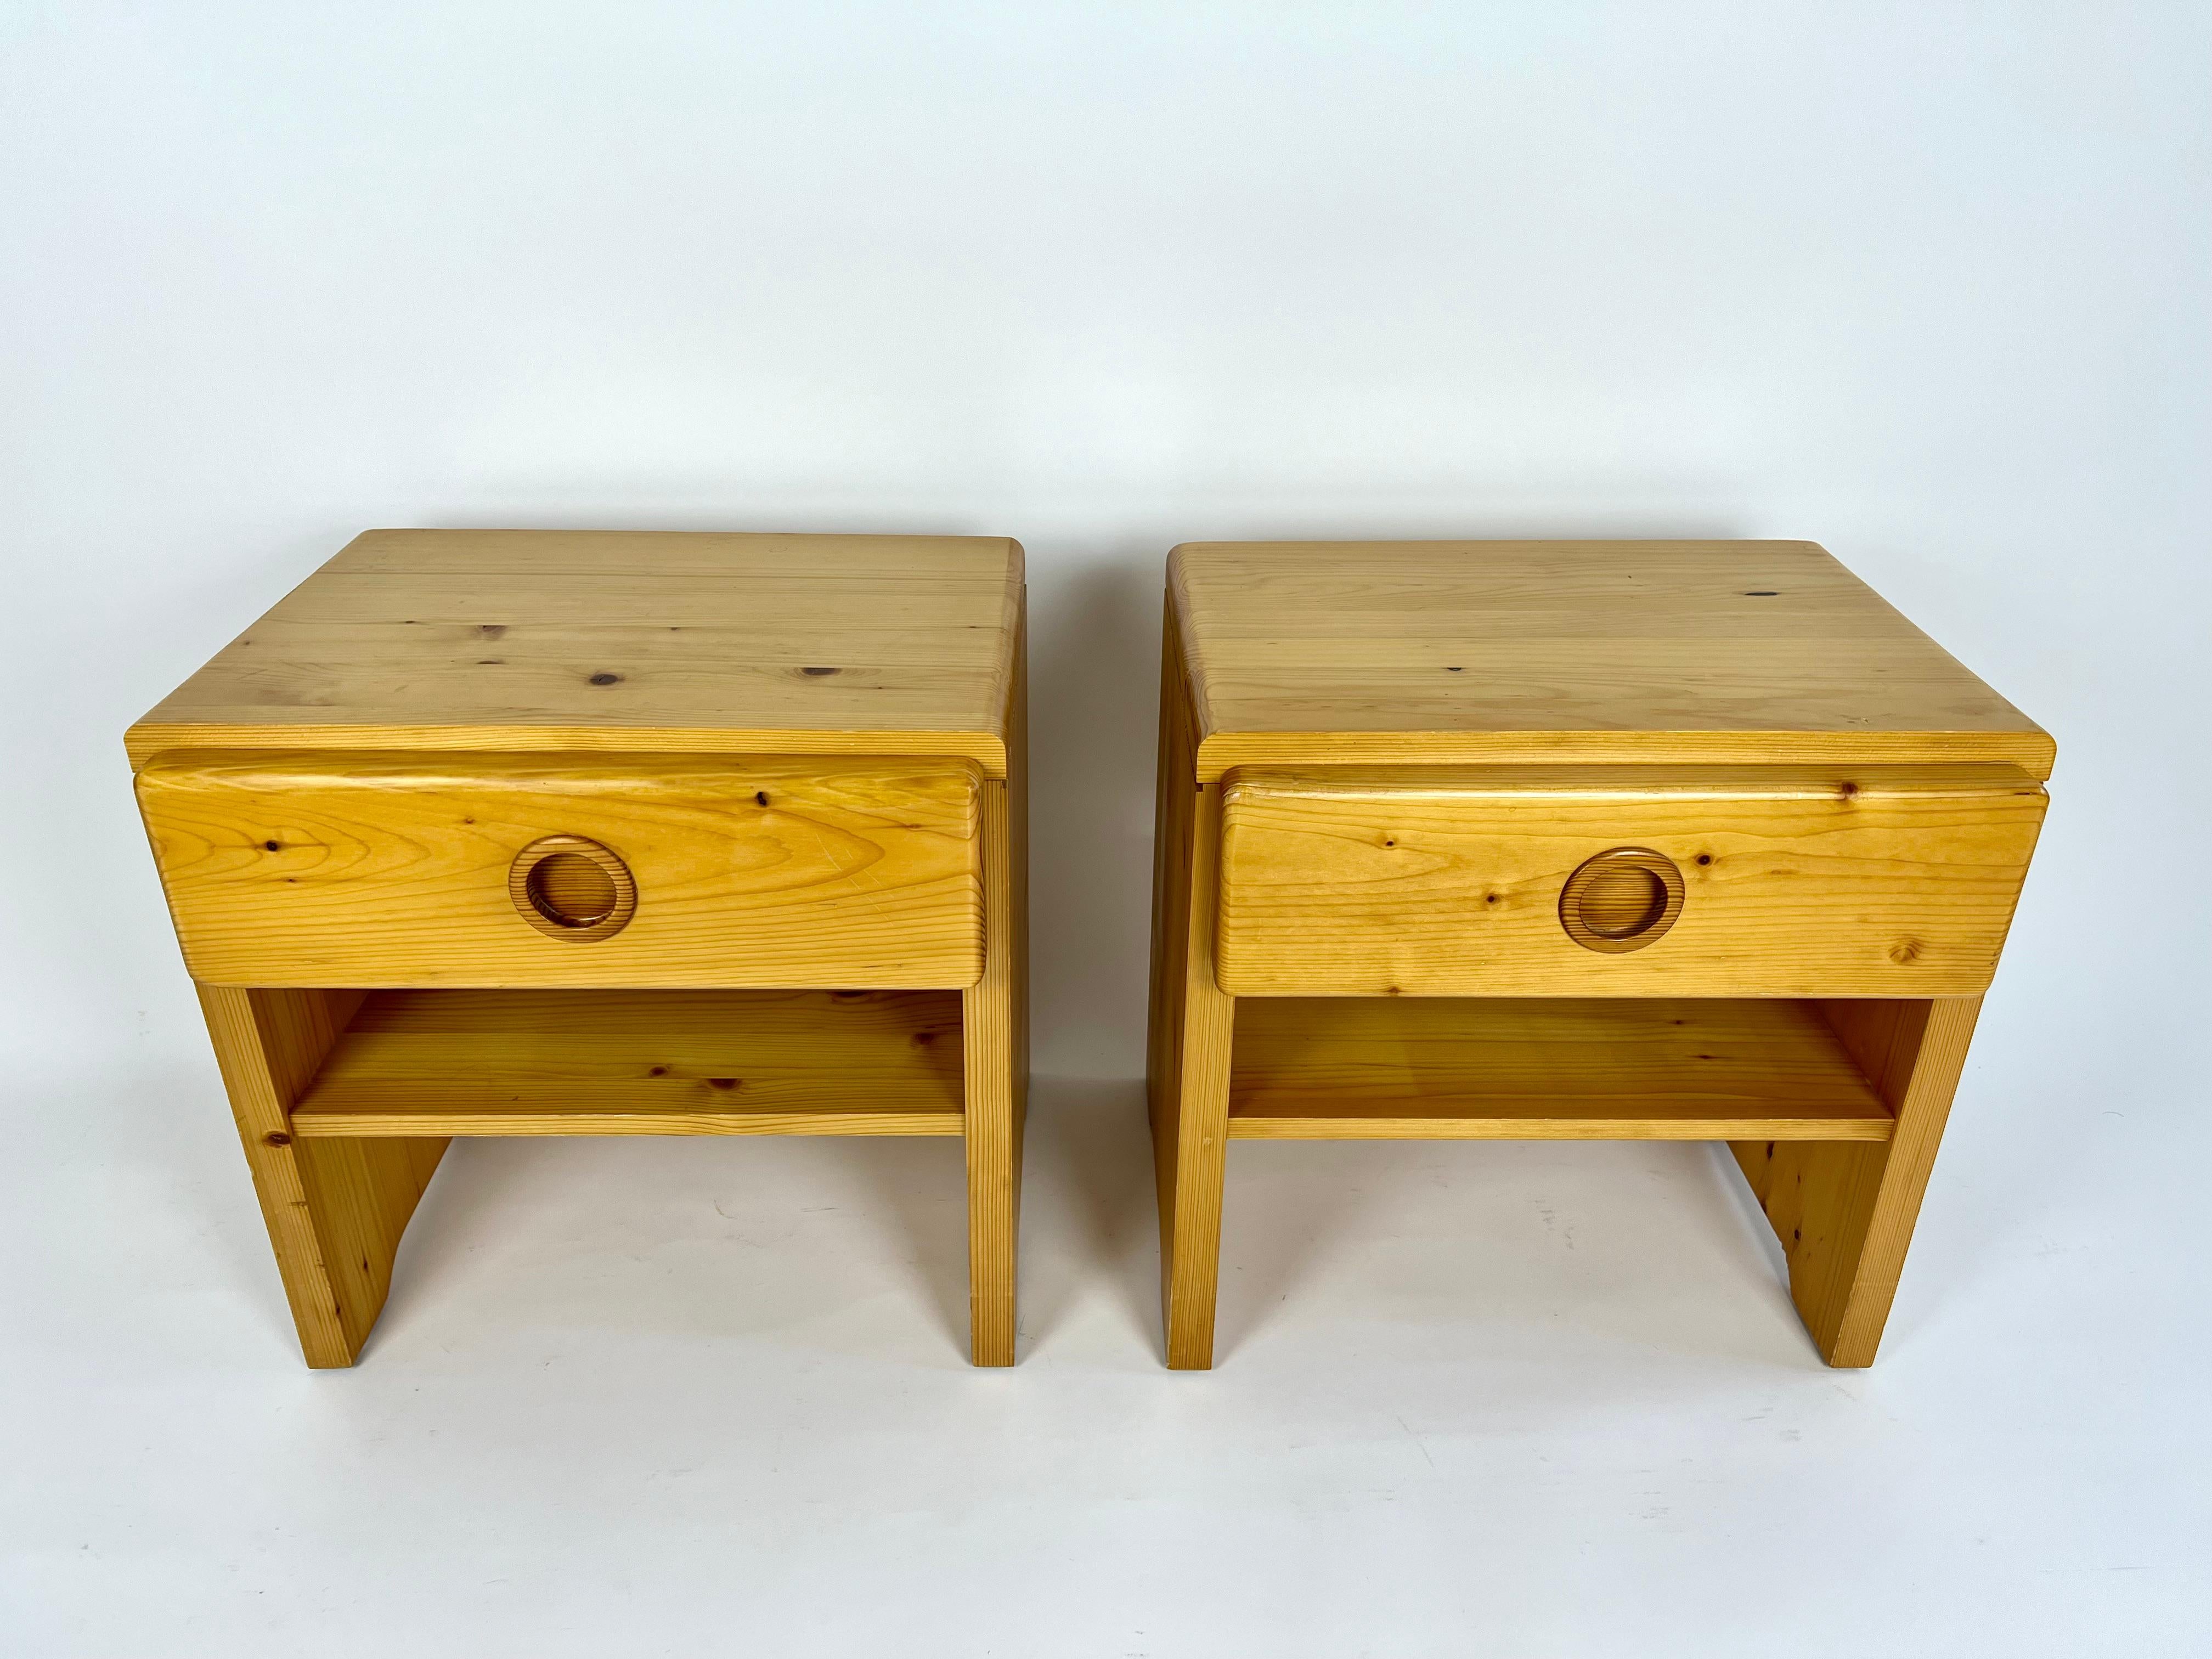 Pair of Charlotte Perriand pine bed side tables / night stands.

Sourced from an apartment clearance in the alpine resort of Arc 1600, France.

Very good vintage condition, great colour to the pine. No damage, minor signs of age and use as pictured,